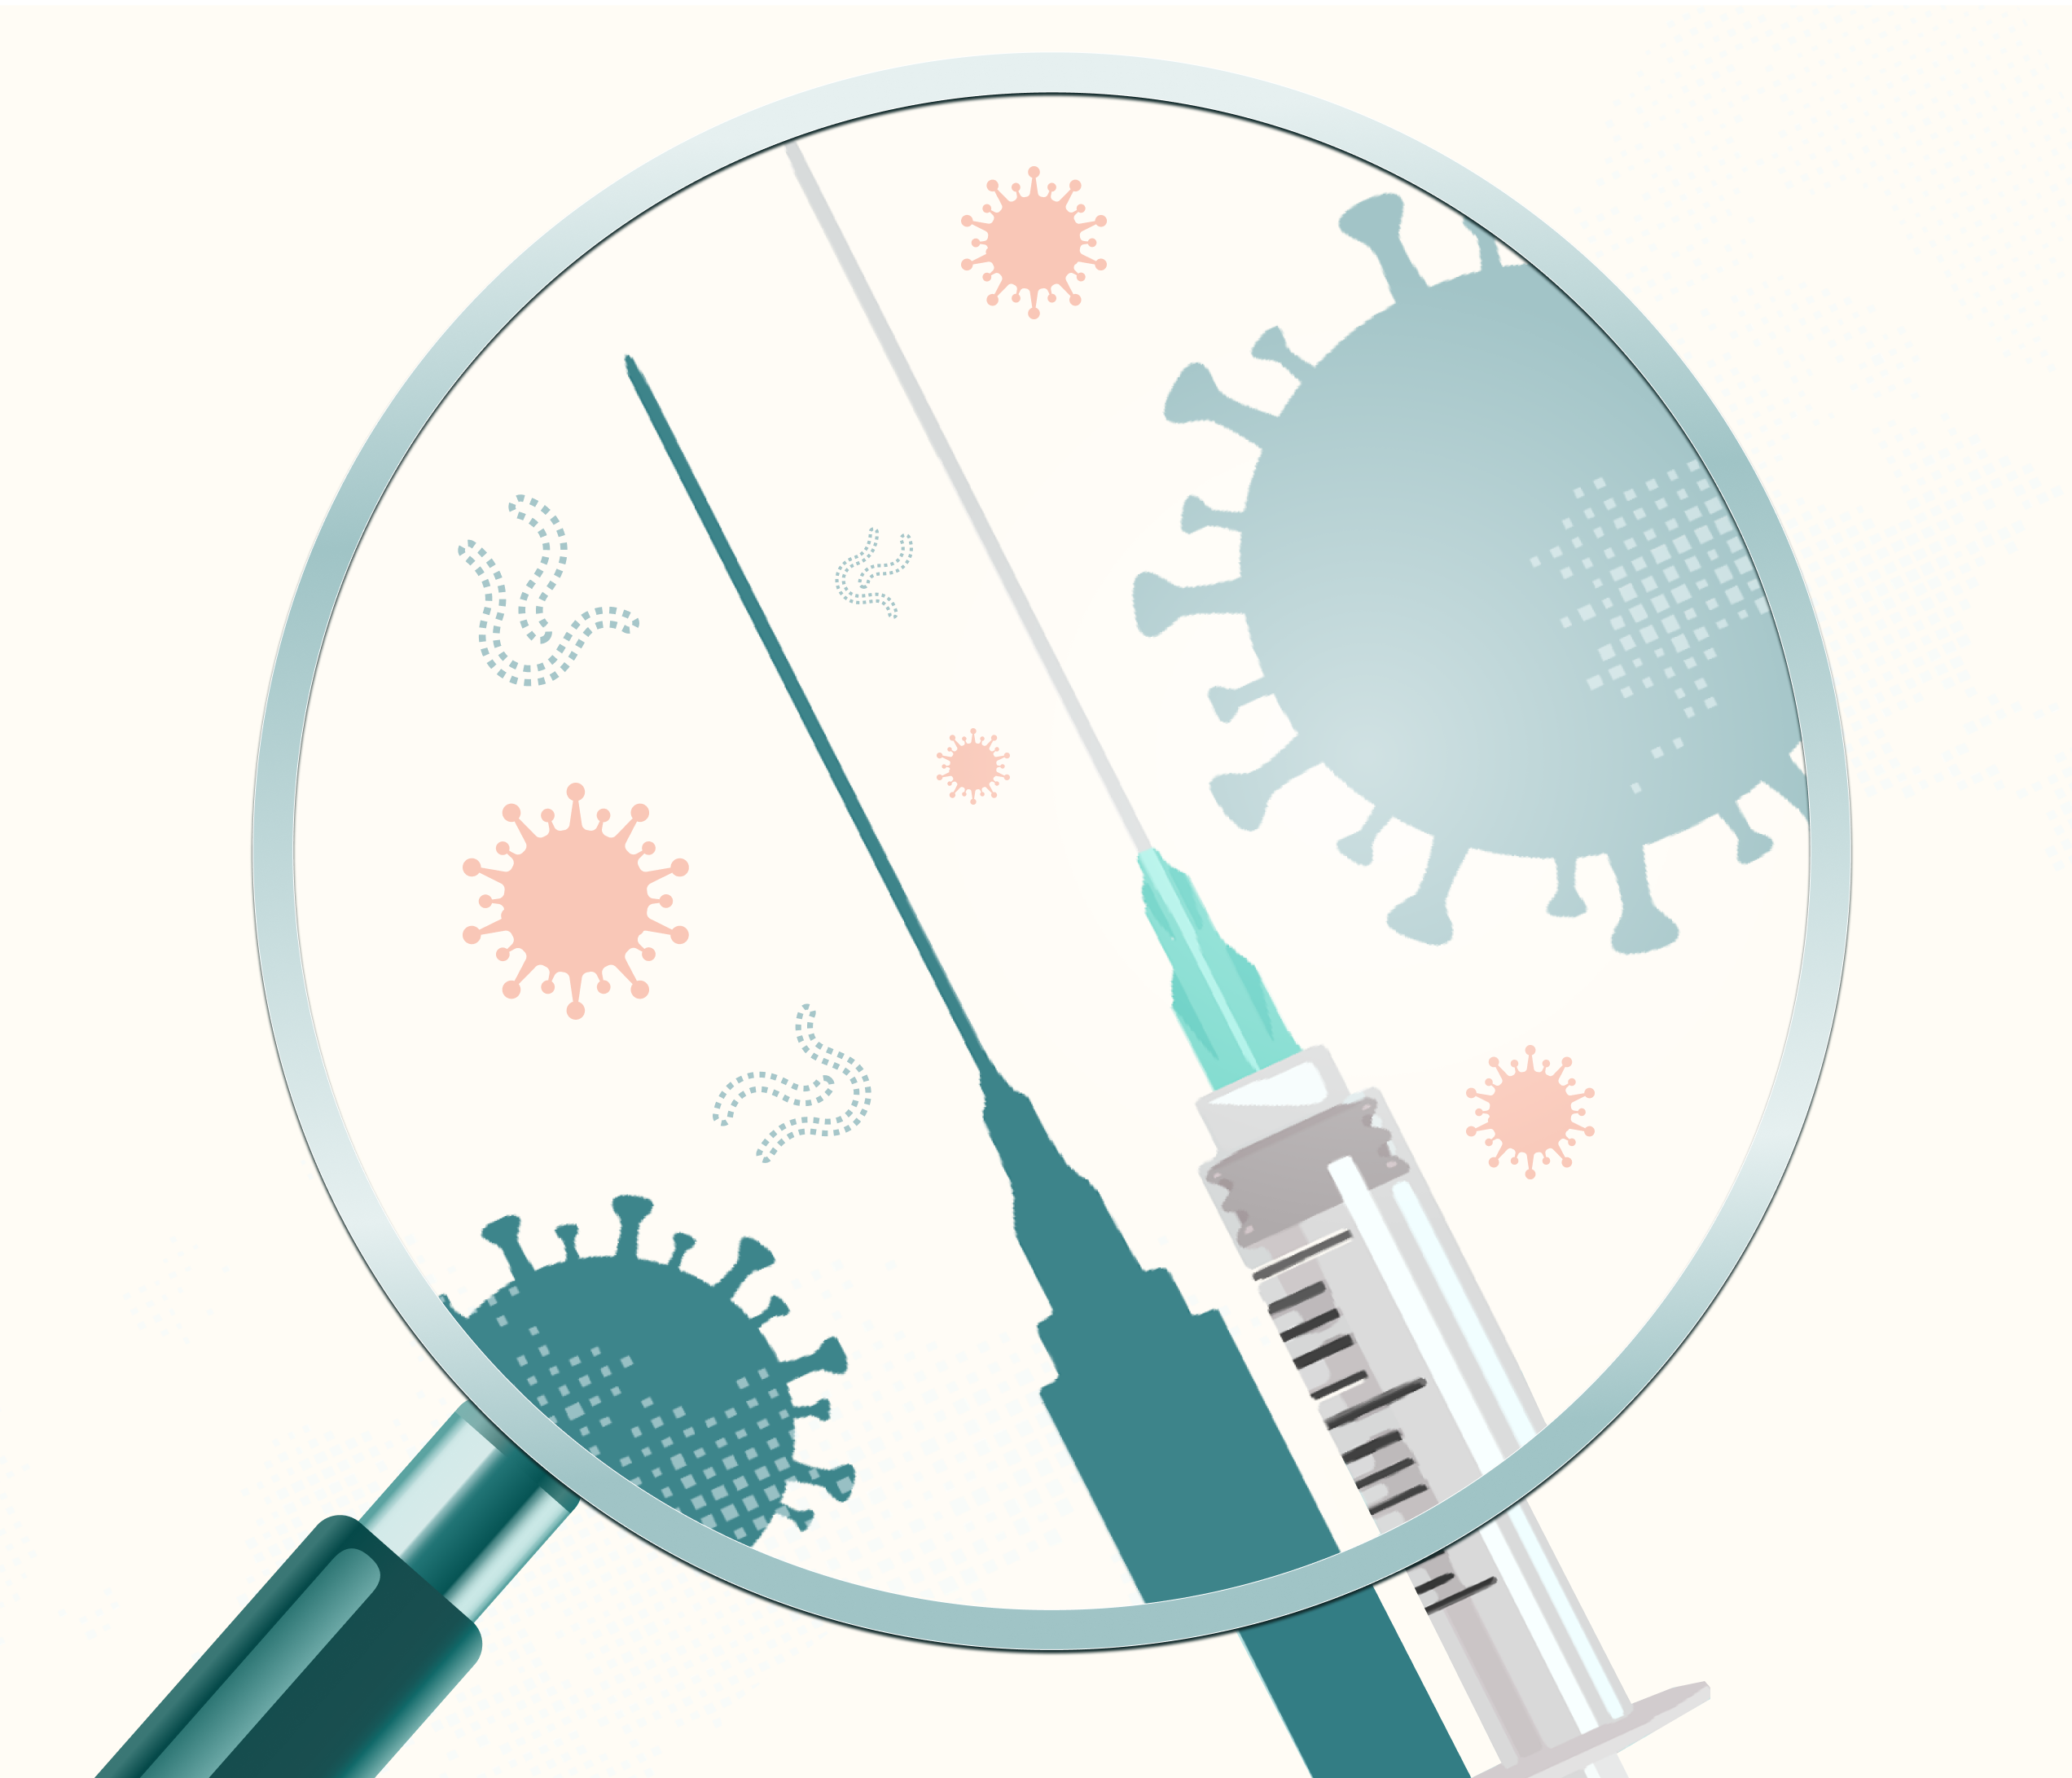 Join The Independent’s free virtual event on Covid vaccines